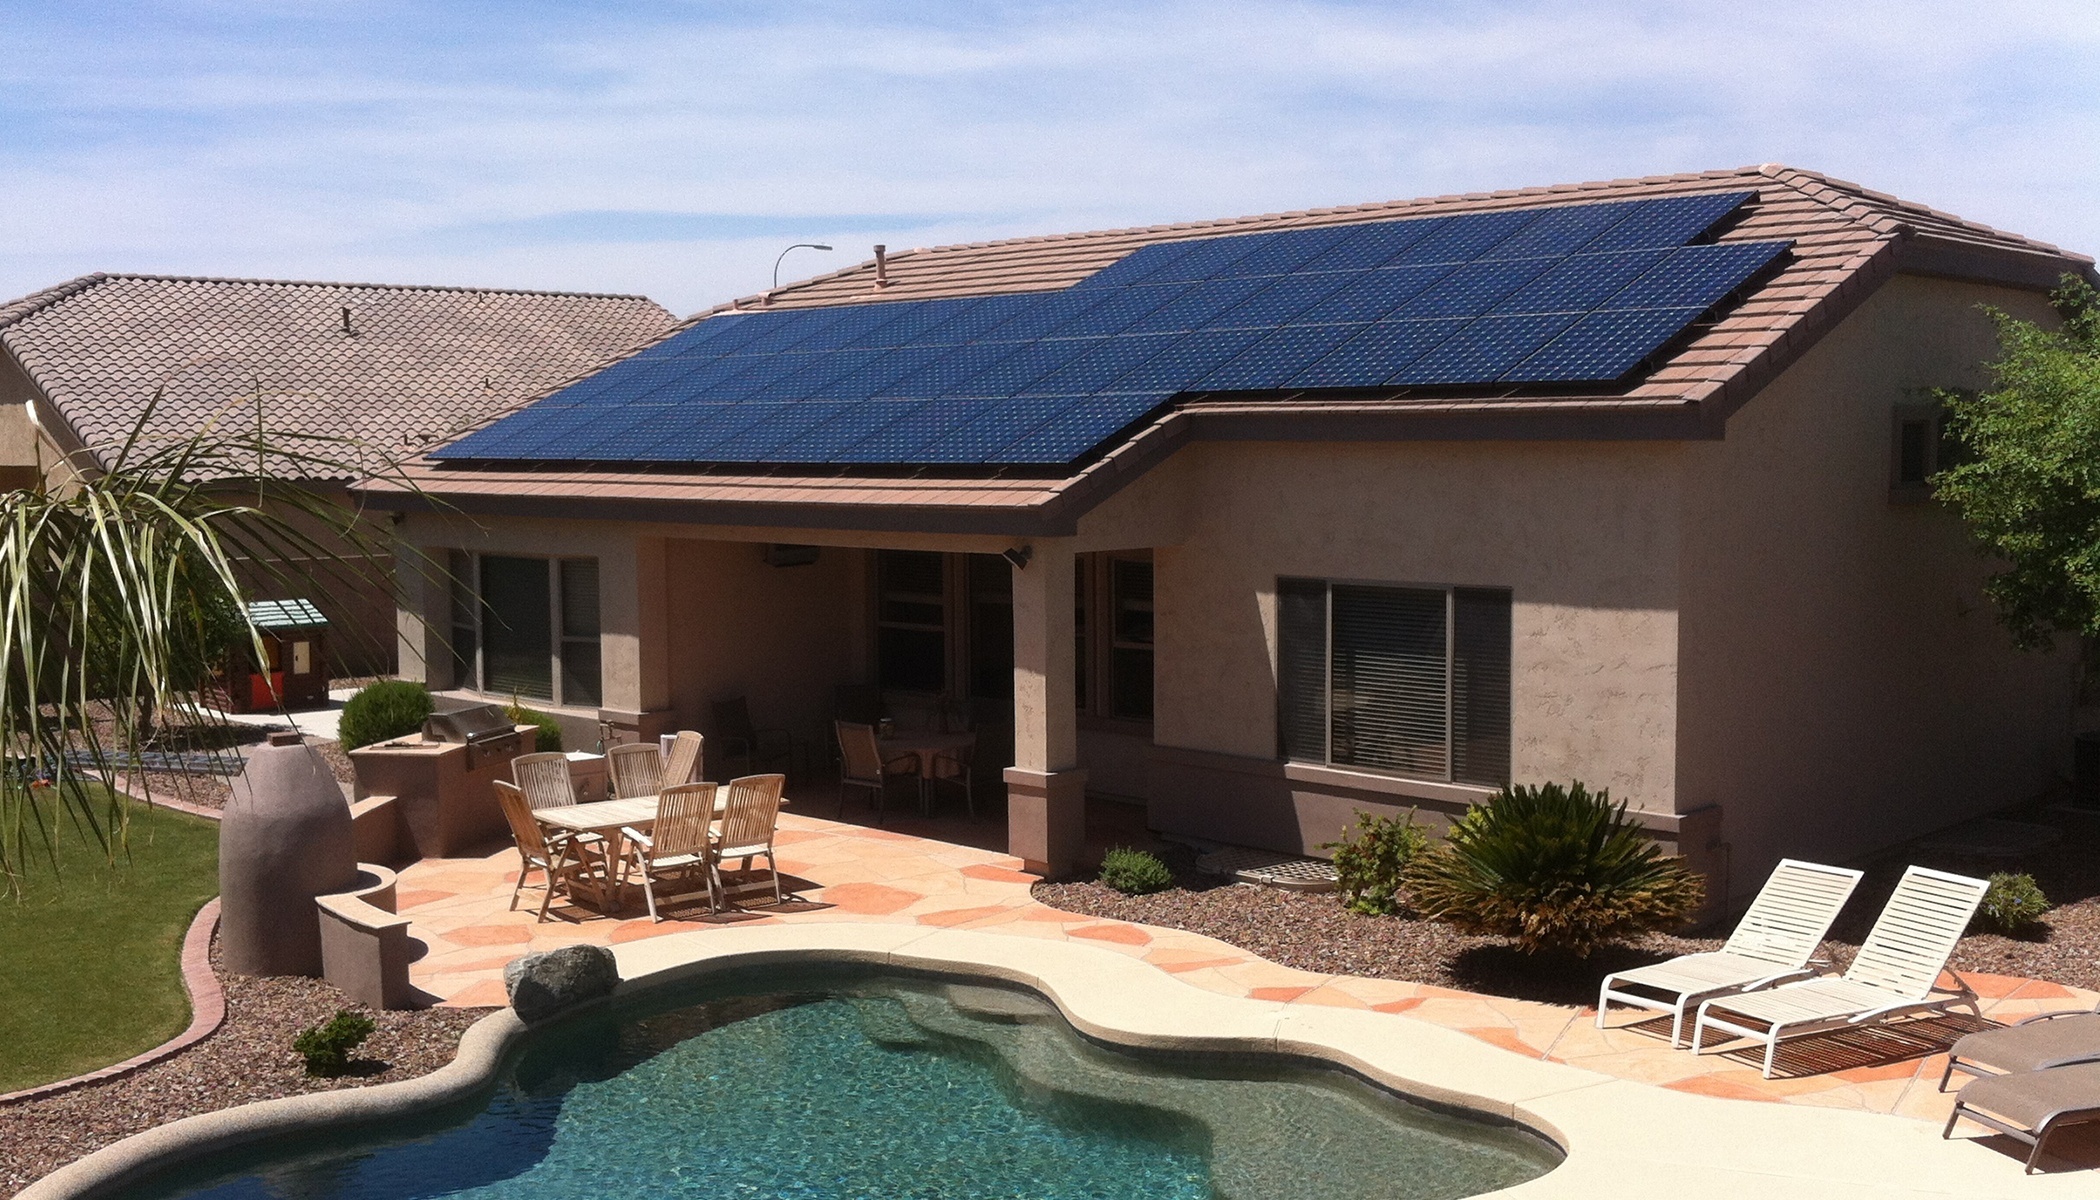 4 Reasons To Invest In Solar Energy In Arizona